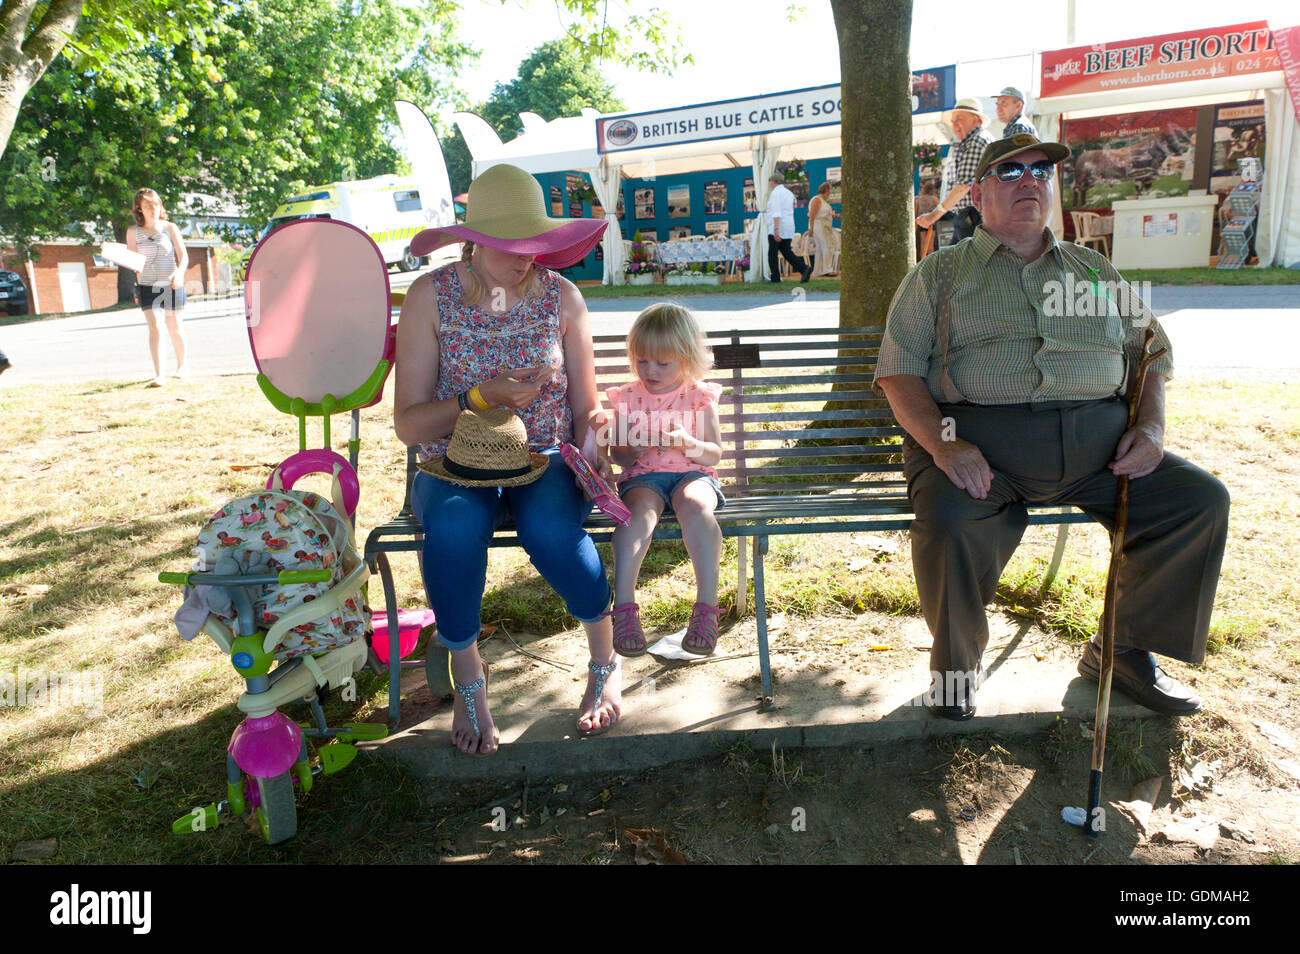 Llanelwedd, Powys, UK. 19th July 2016. Angharad (L) teaching assistant from Llandysul, Wales, and her daughter 2 1/2 -year-old daughter Madi, take refuge in the shade of trees near the cattle ring on the 2nd day of the Royal Welsh  Agricultural Show 2016 with forecasts of temperatures in the high 20 degrees centigrade. Credit:  Graham M. Lawrence/Alamy Live News. Stock Photo